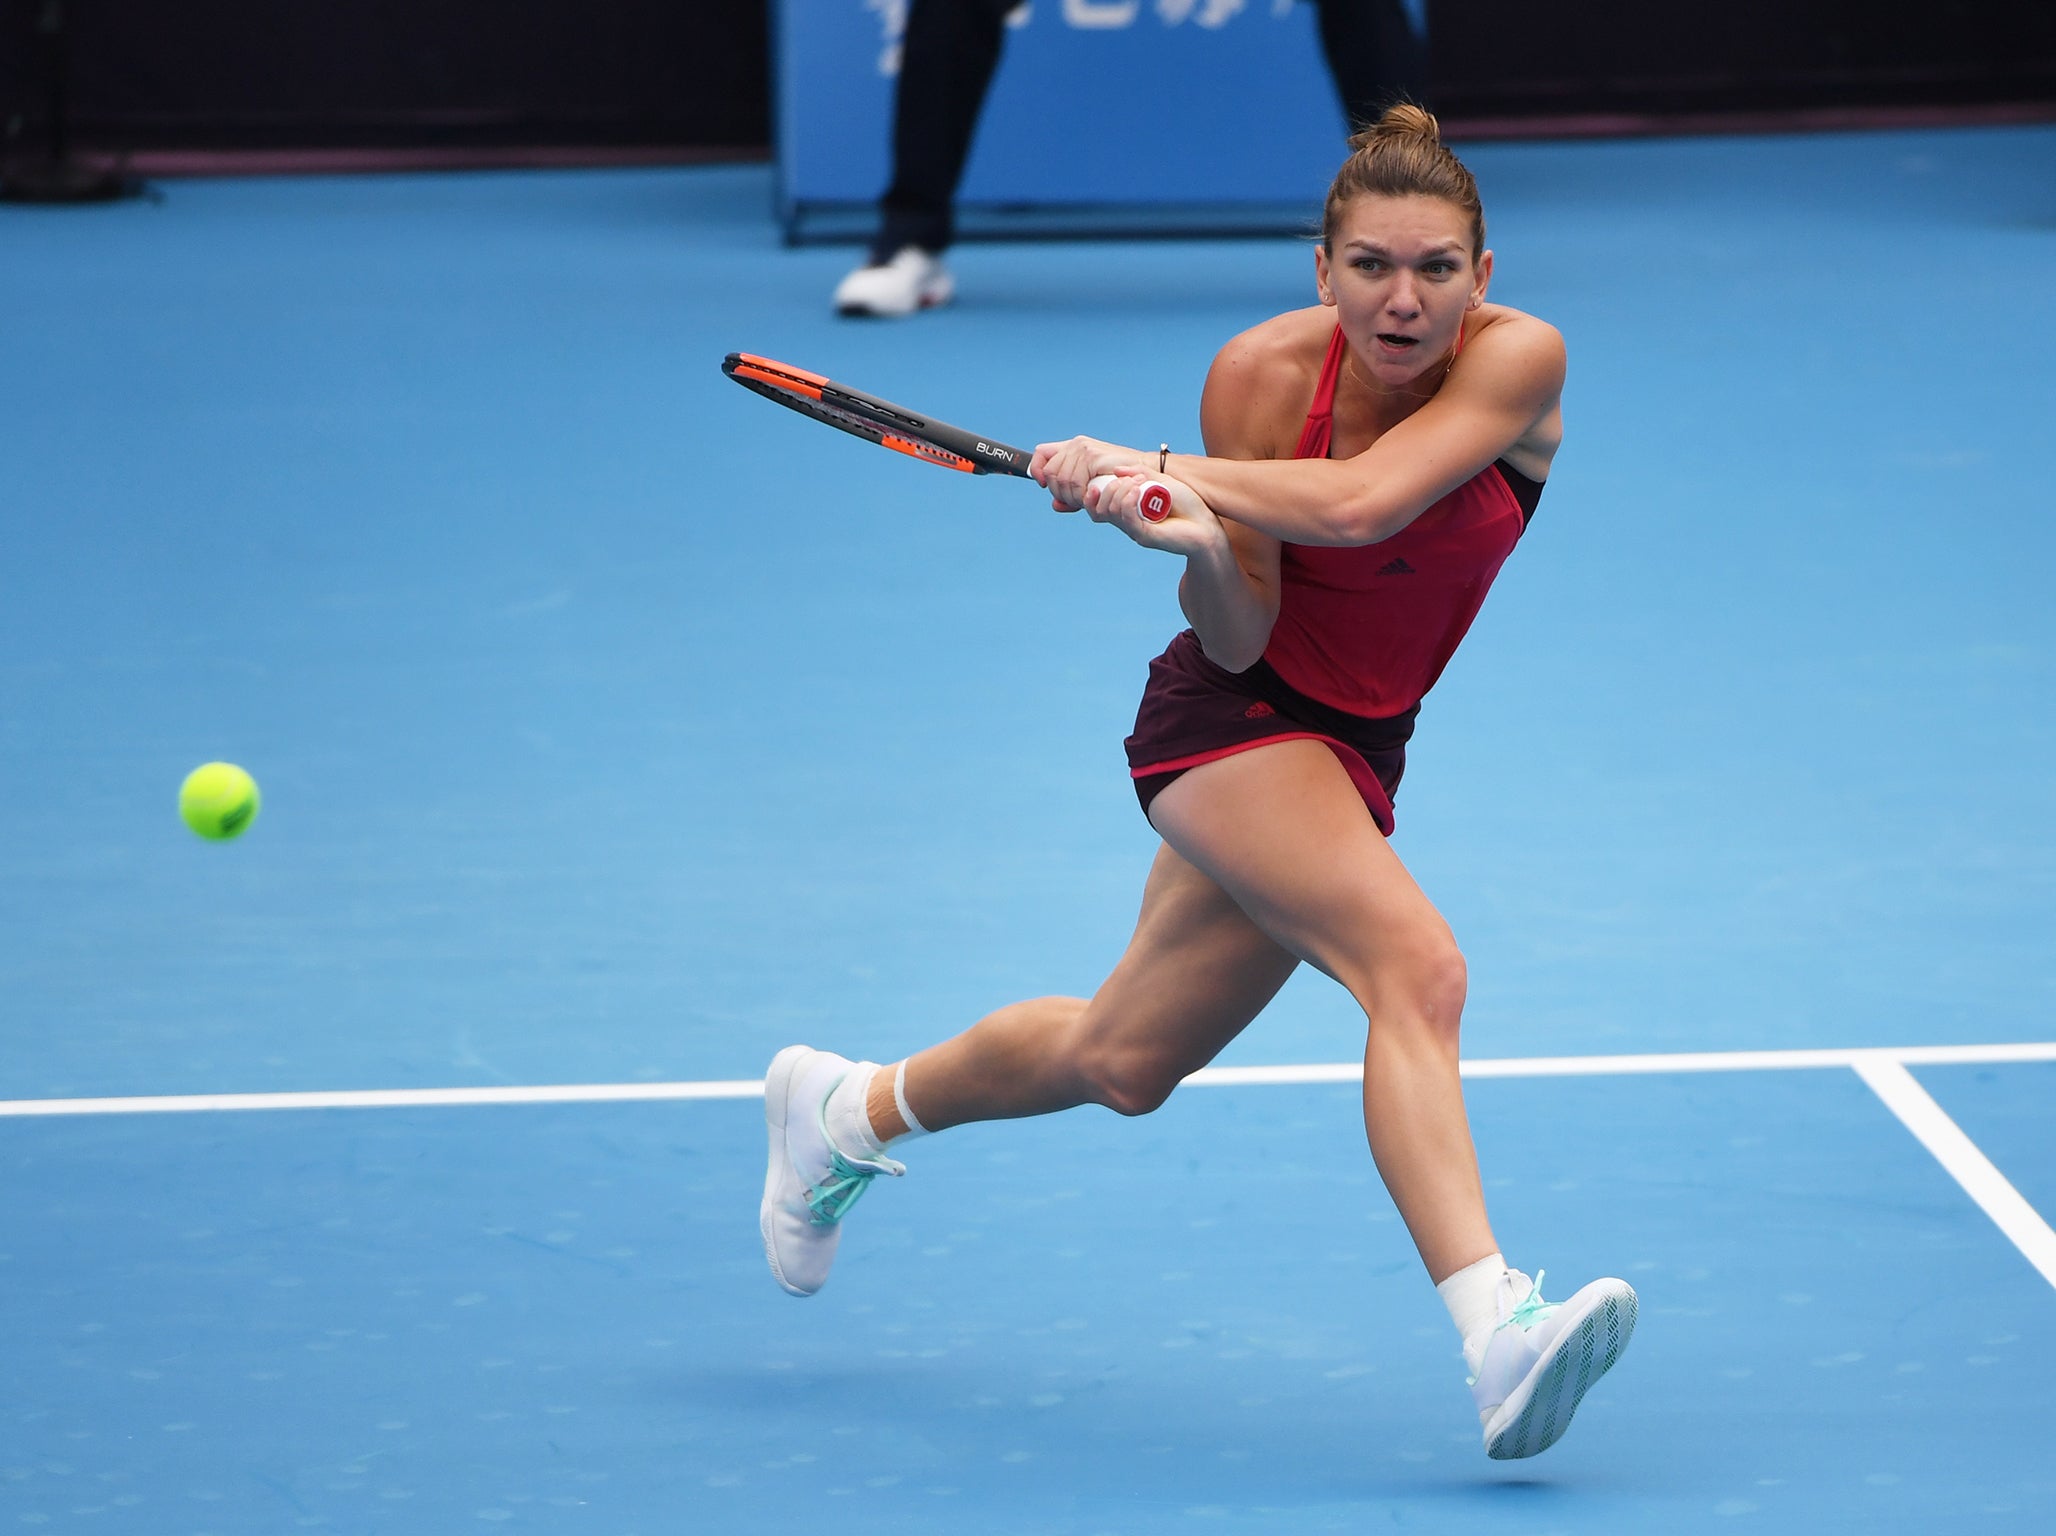 Halep says she is feeling confident ahead of her match with Sharapova